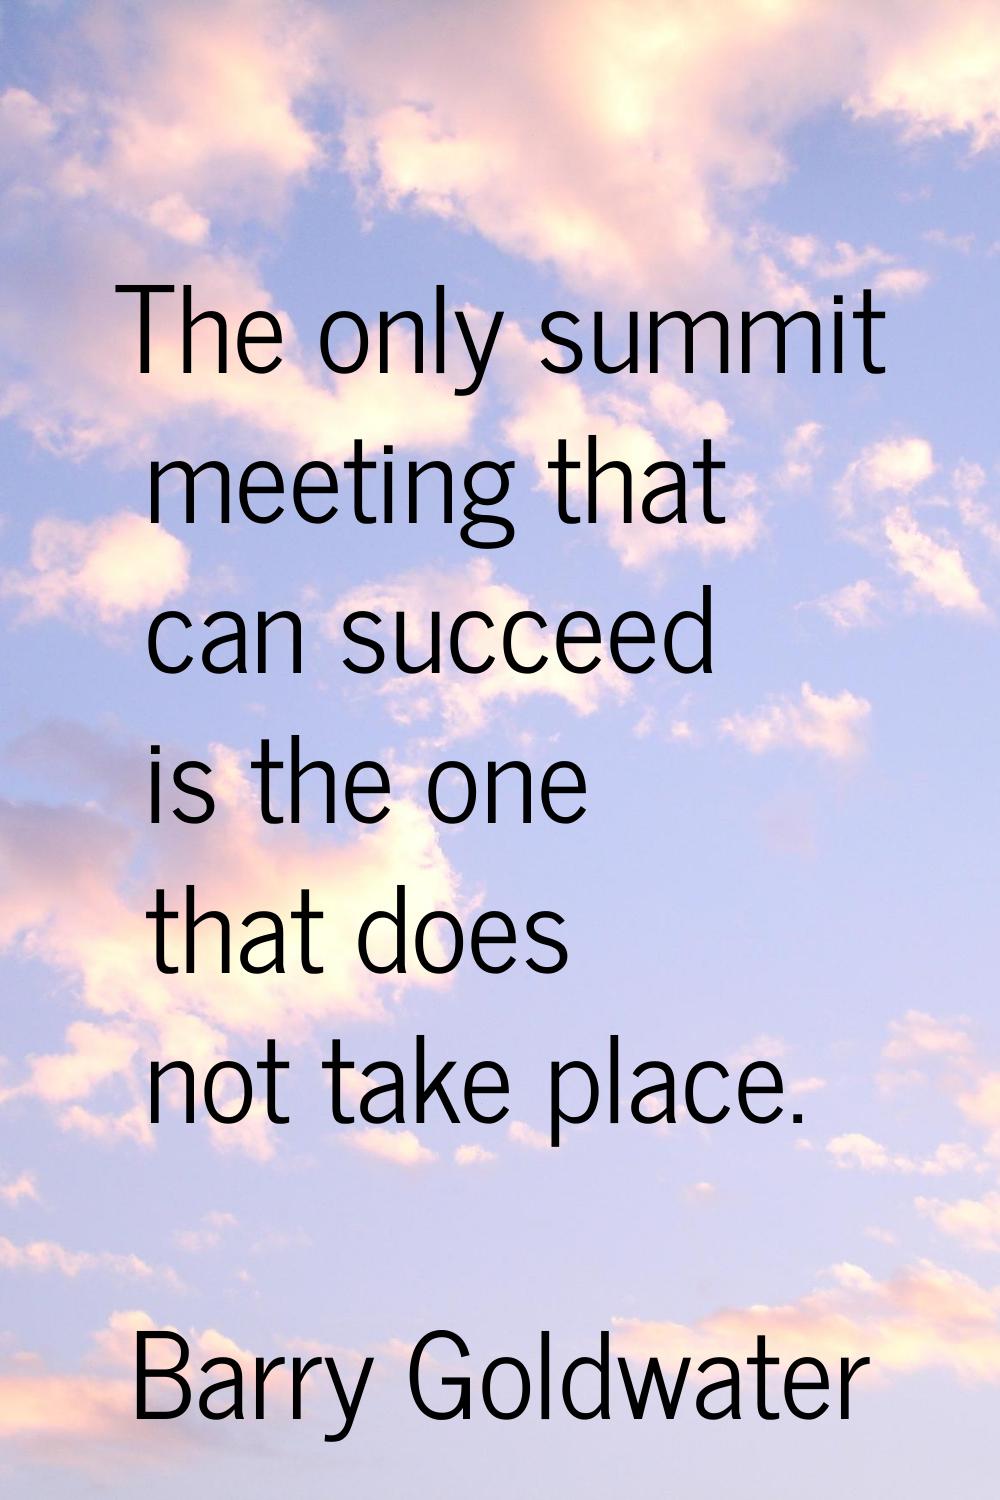 The only summit meeting that can succeed is the one that does not take place.